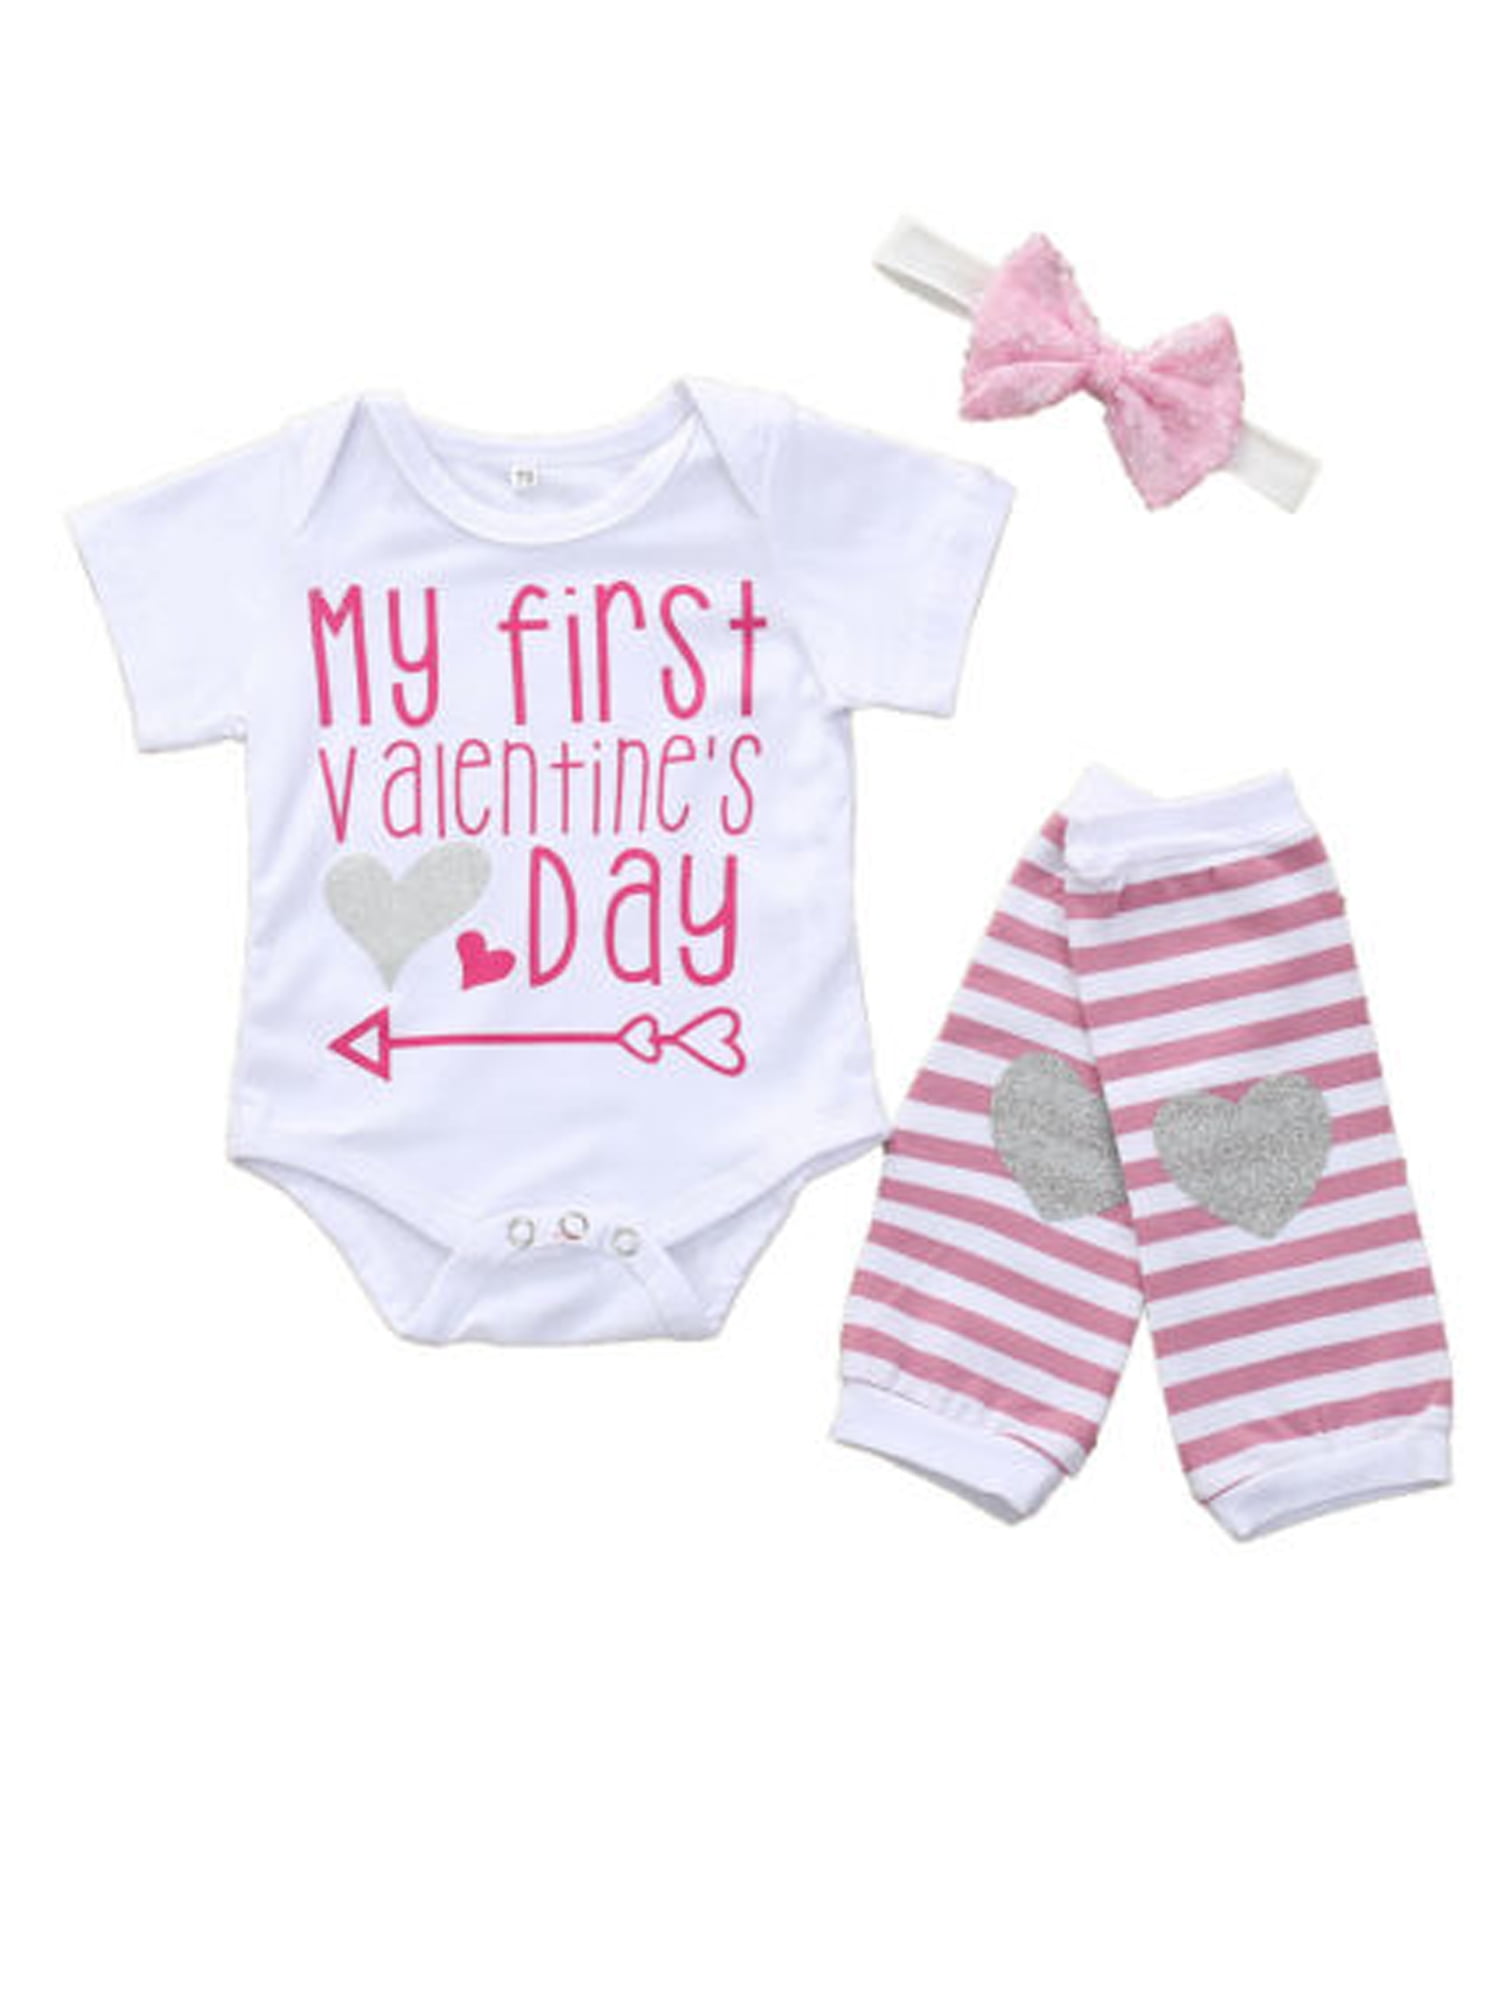 3 pcs set  FREE SHIPPING Details about   minne  Baby Toddler Romper pink shoes headband 